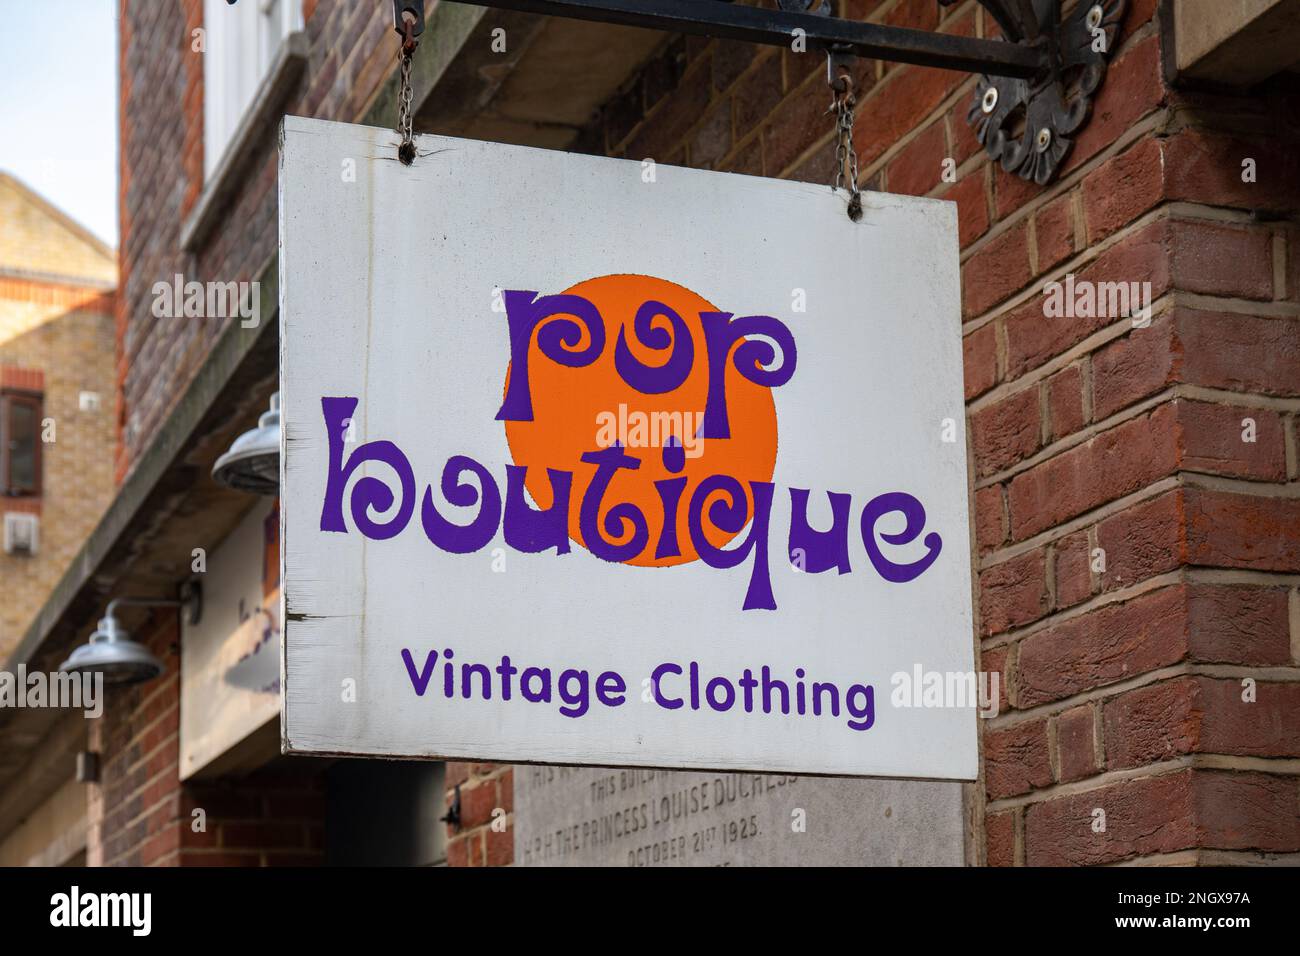 Pop Boutique vintage clothing store sign in Seven Dials district of London, England Stock Photo